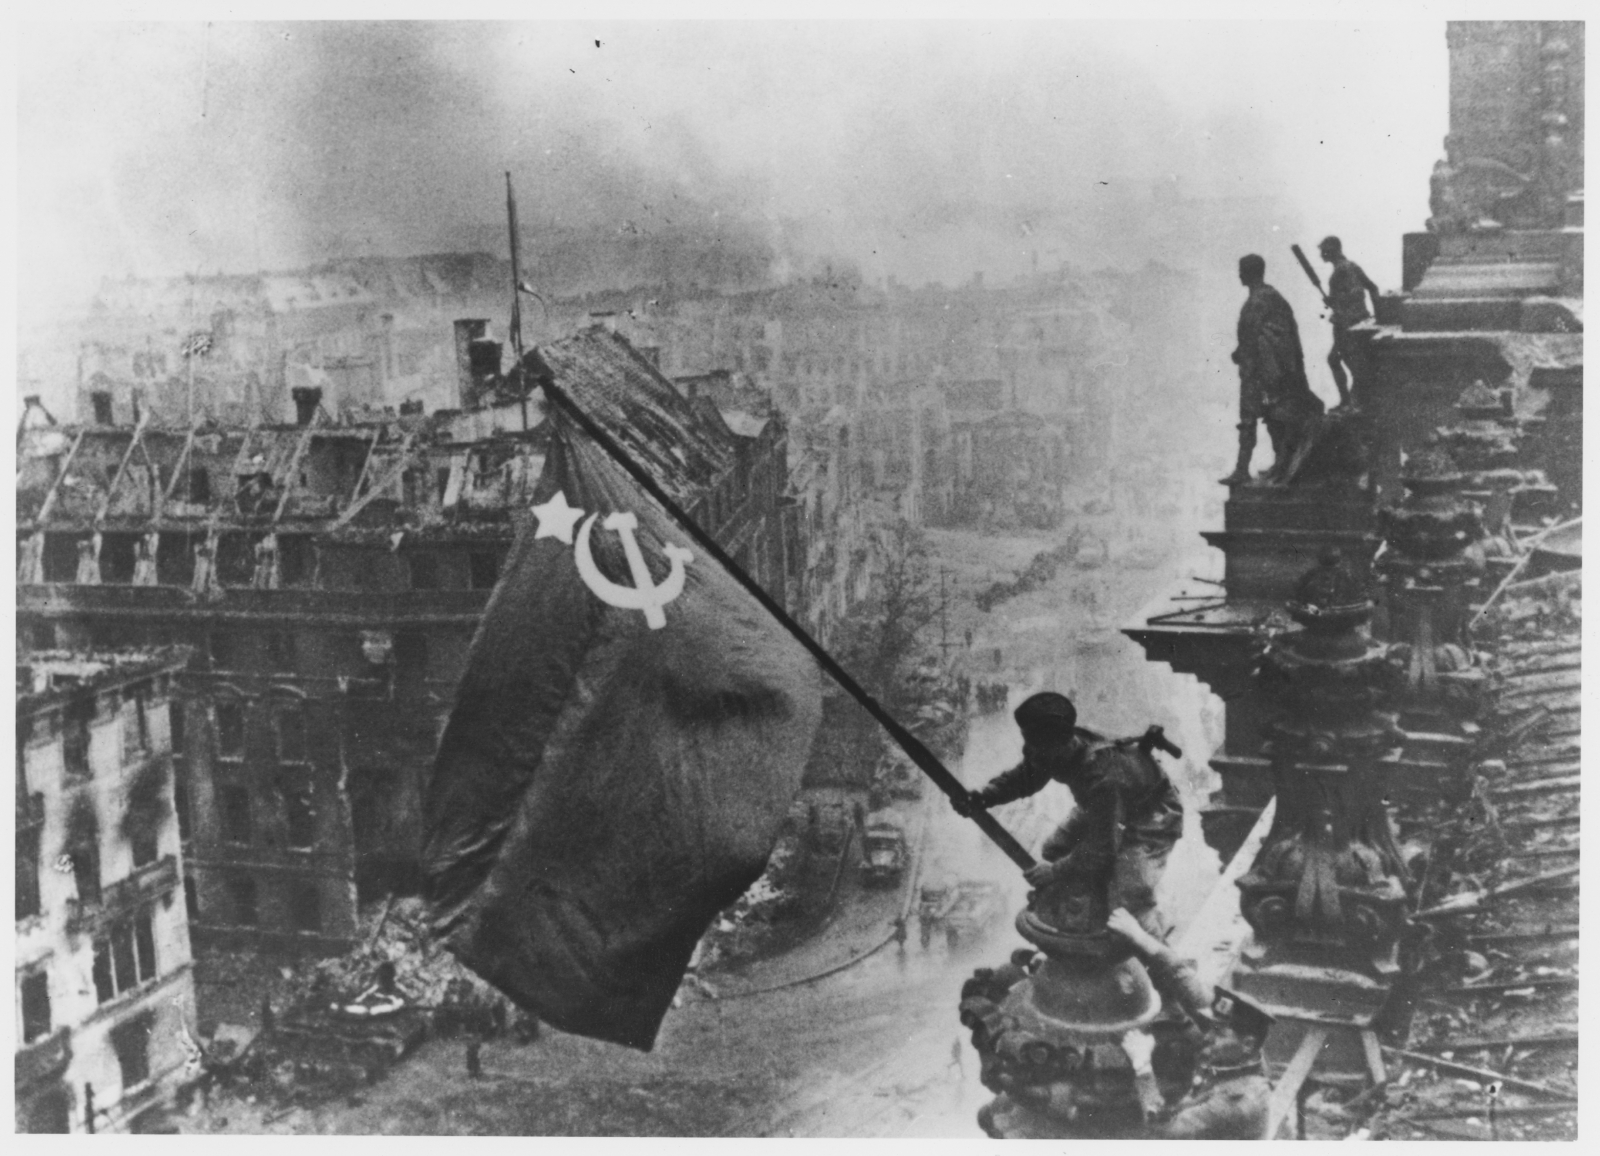 Russian soldiers flying the Red Flag, made from table cloths, over the ruins of the Reichstag in Berlin